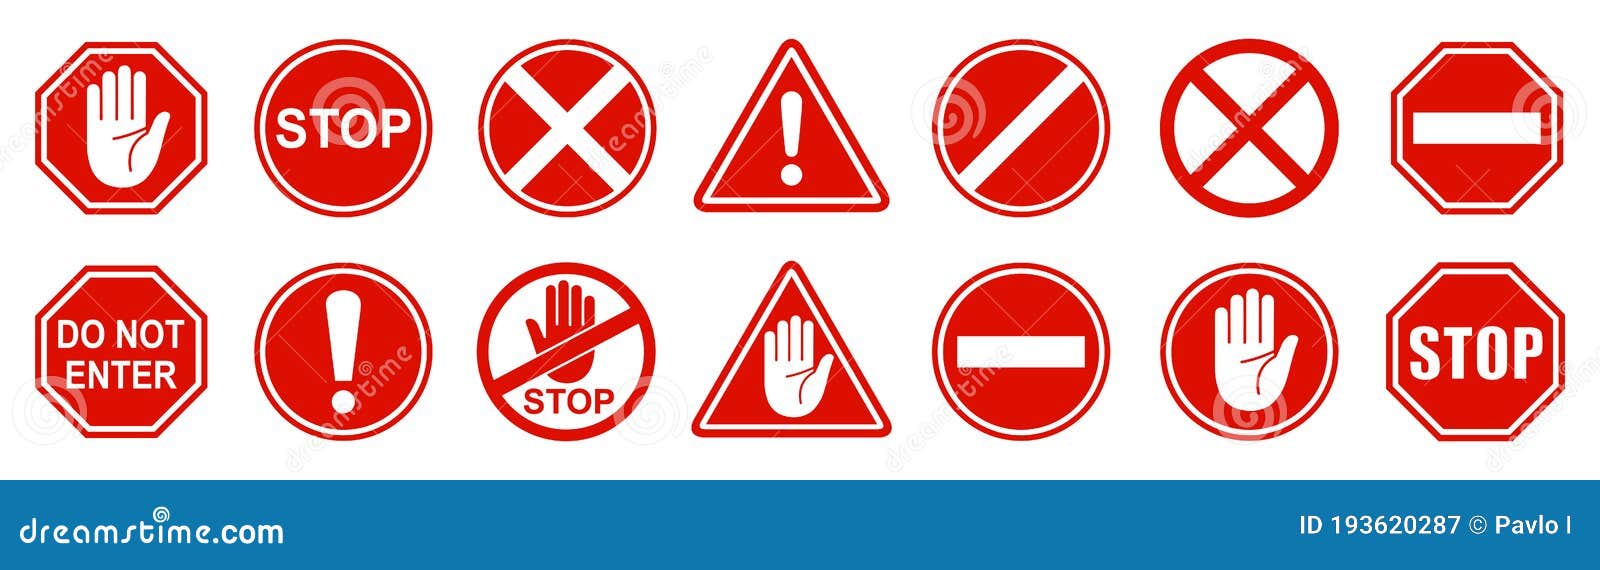 Set Stop Red Sign Icon With White Hand Do Not Enter Warning Stop Sign Vector Stock Vector Illustration Of Movement Security